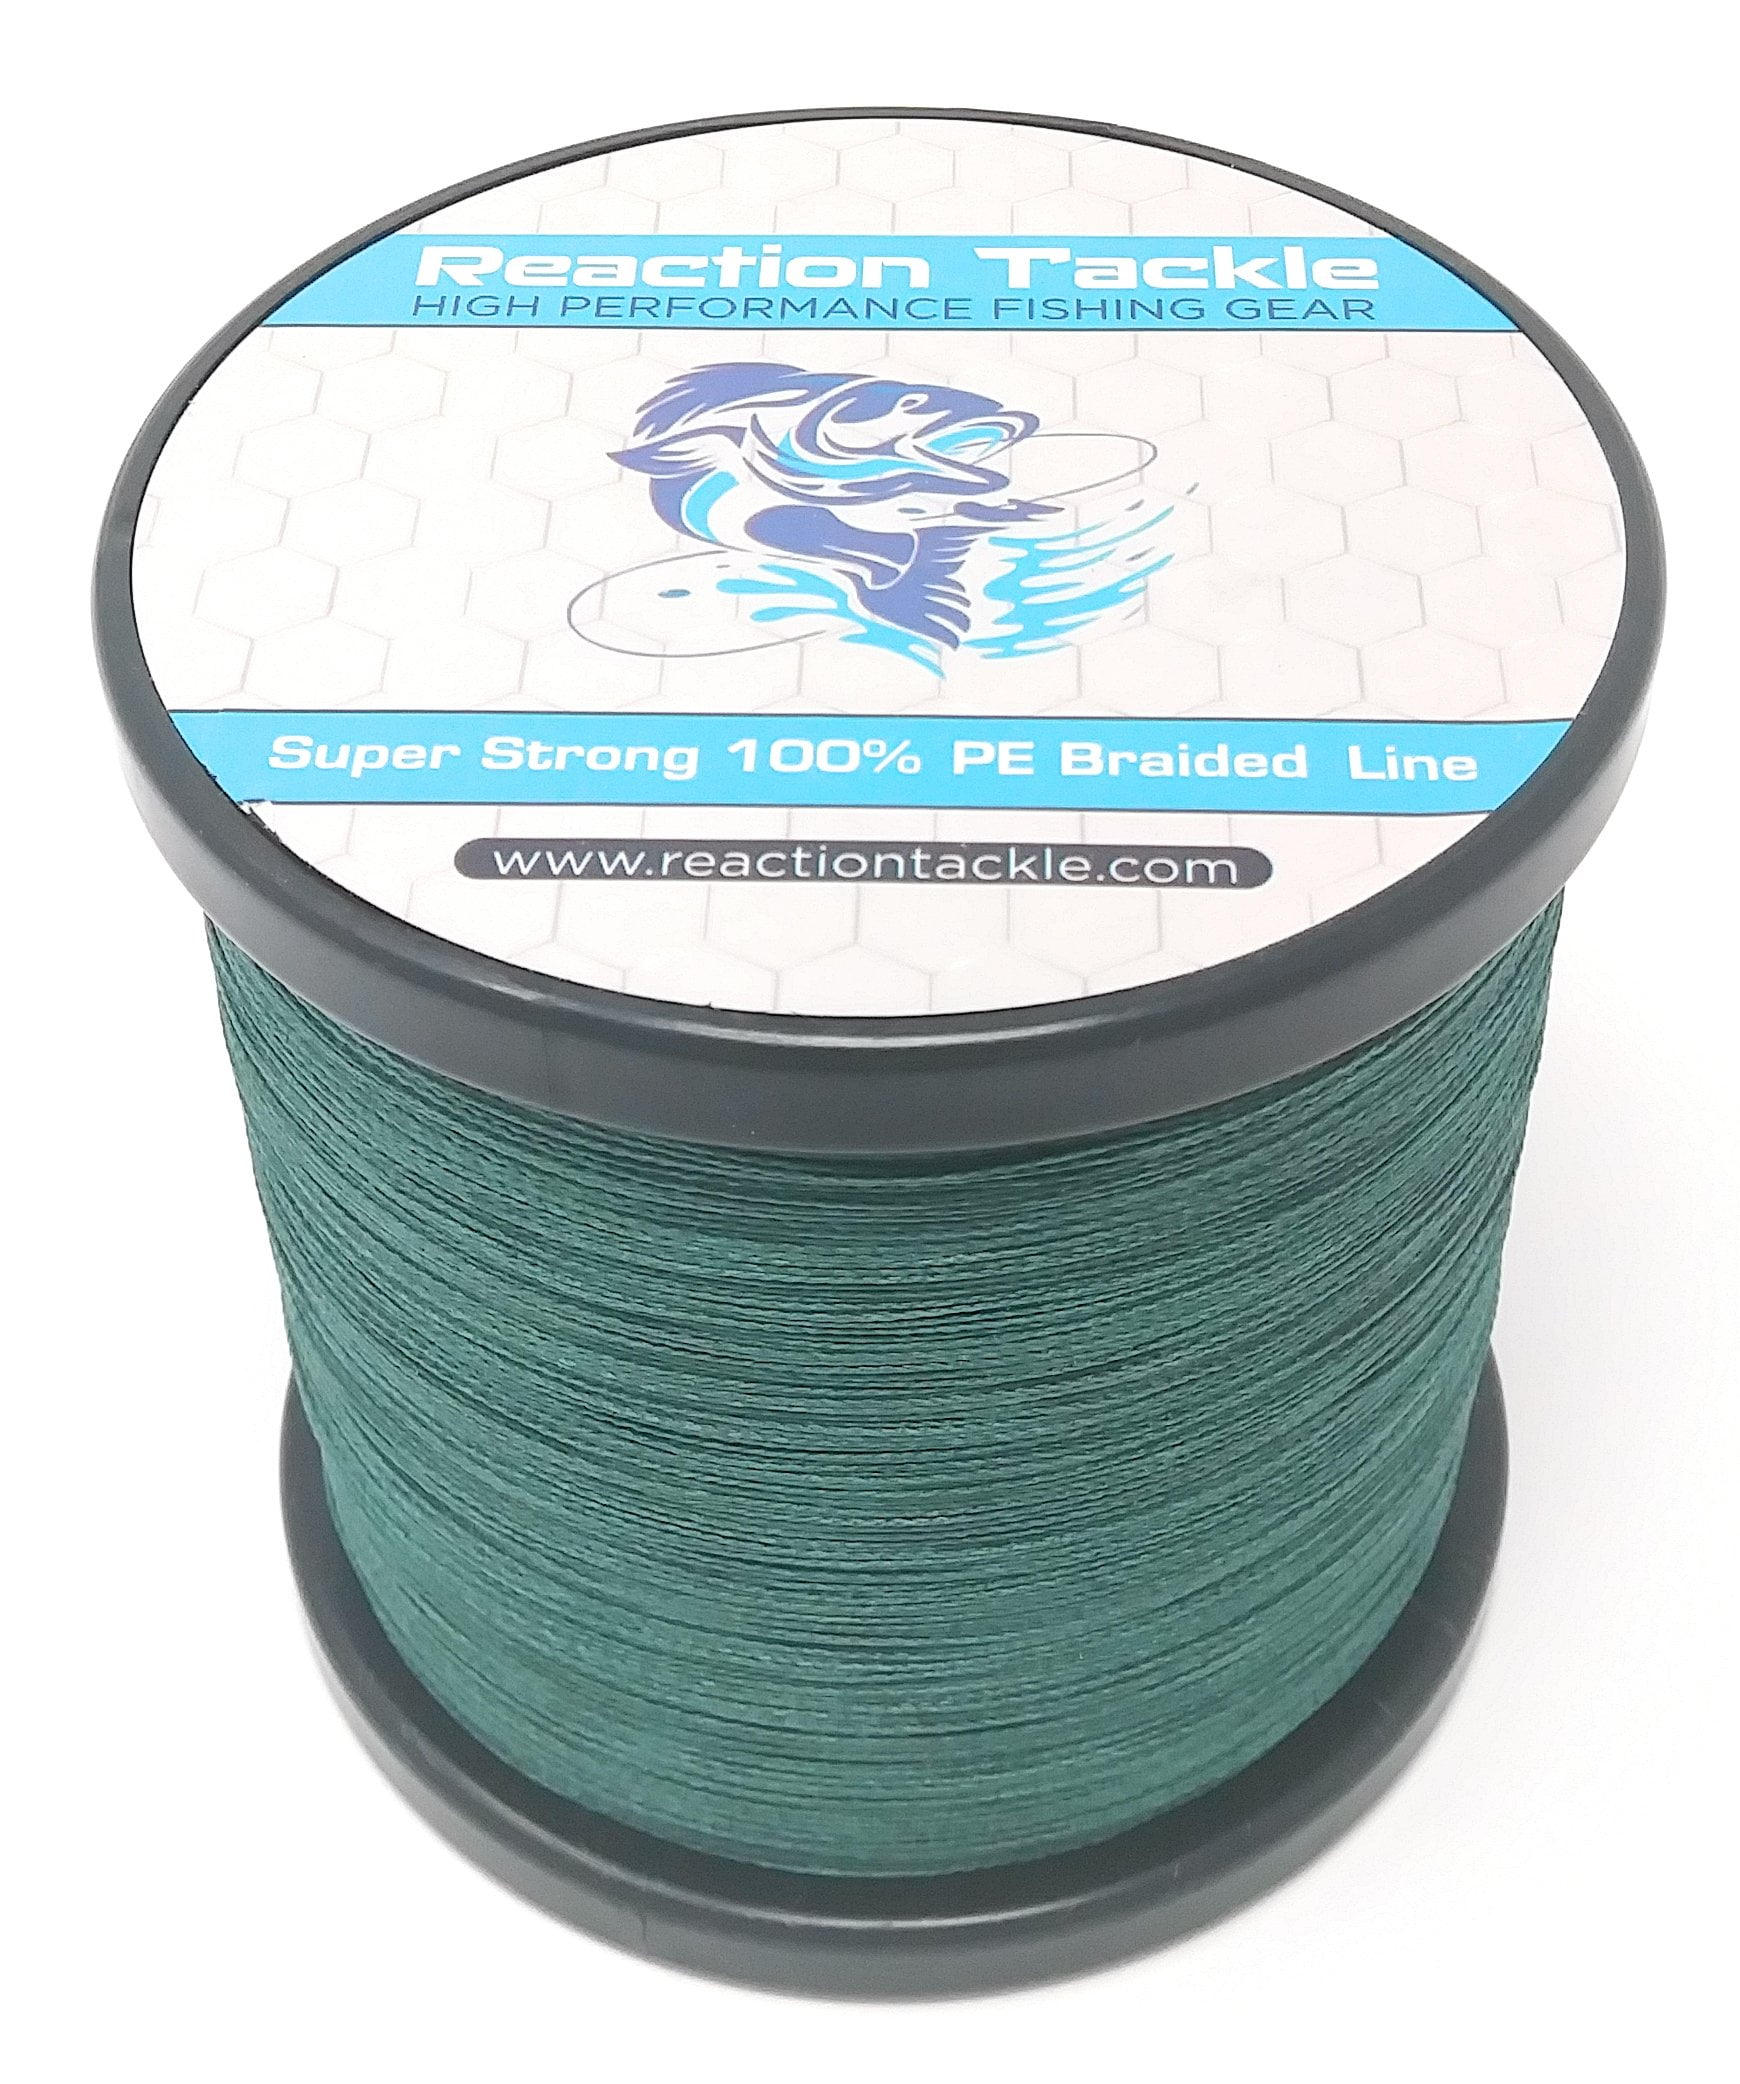 Reaction Tackle Low Vis Green 20LB 300yd 